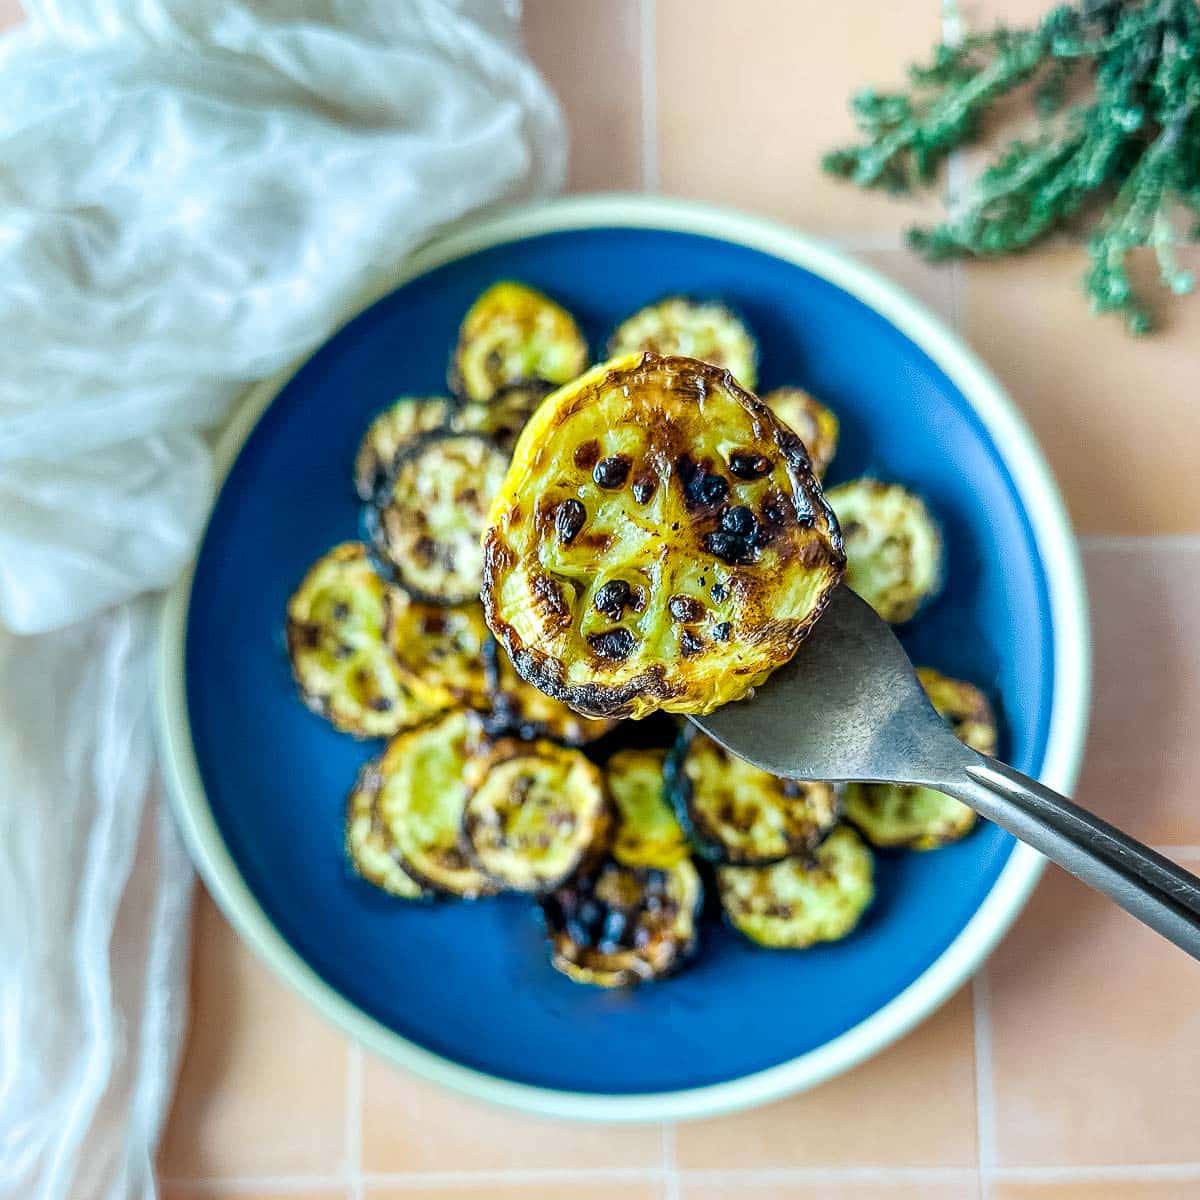 A slice of air fried summer squash is held on a fork over a plate of air fried zucchini and summer squash.